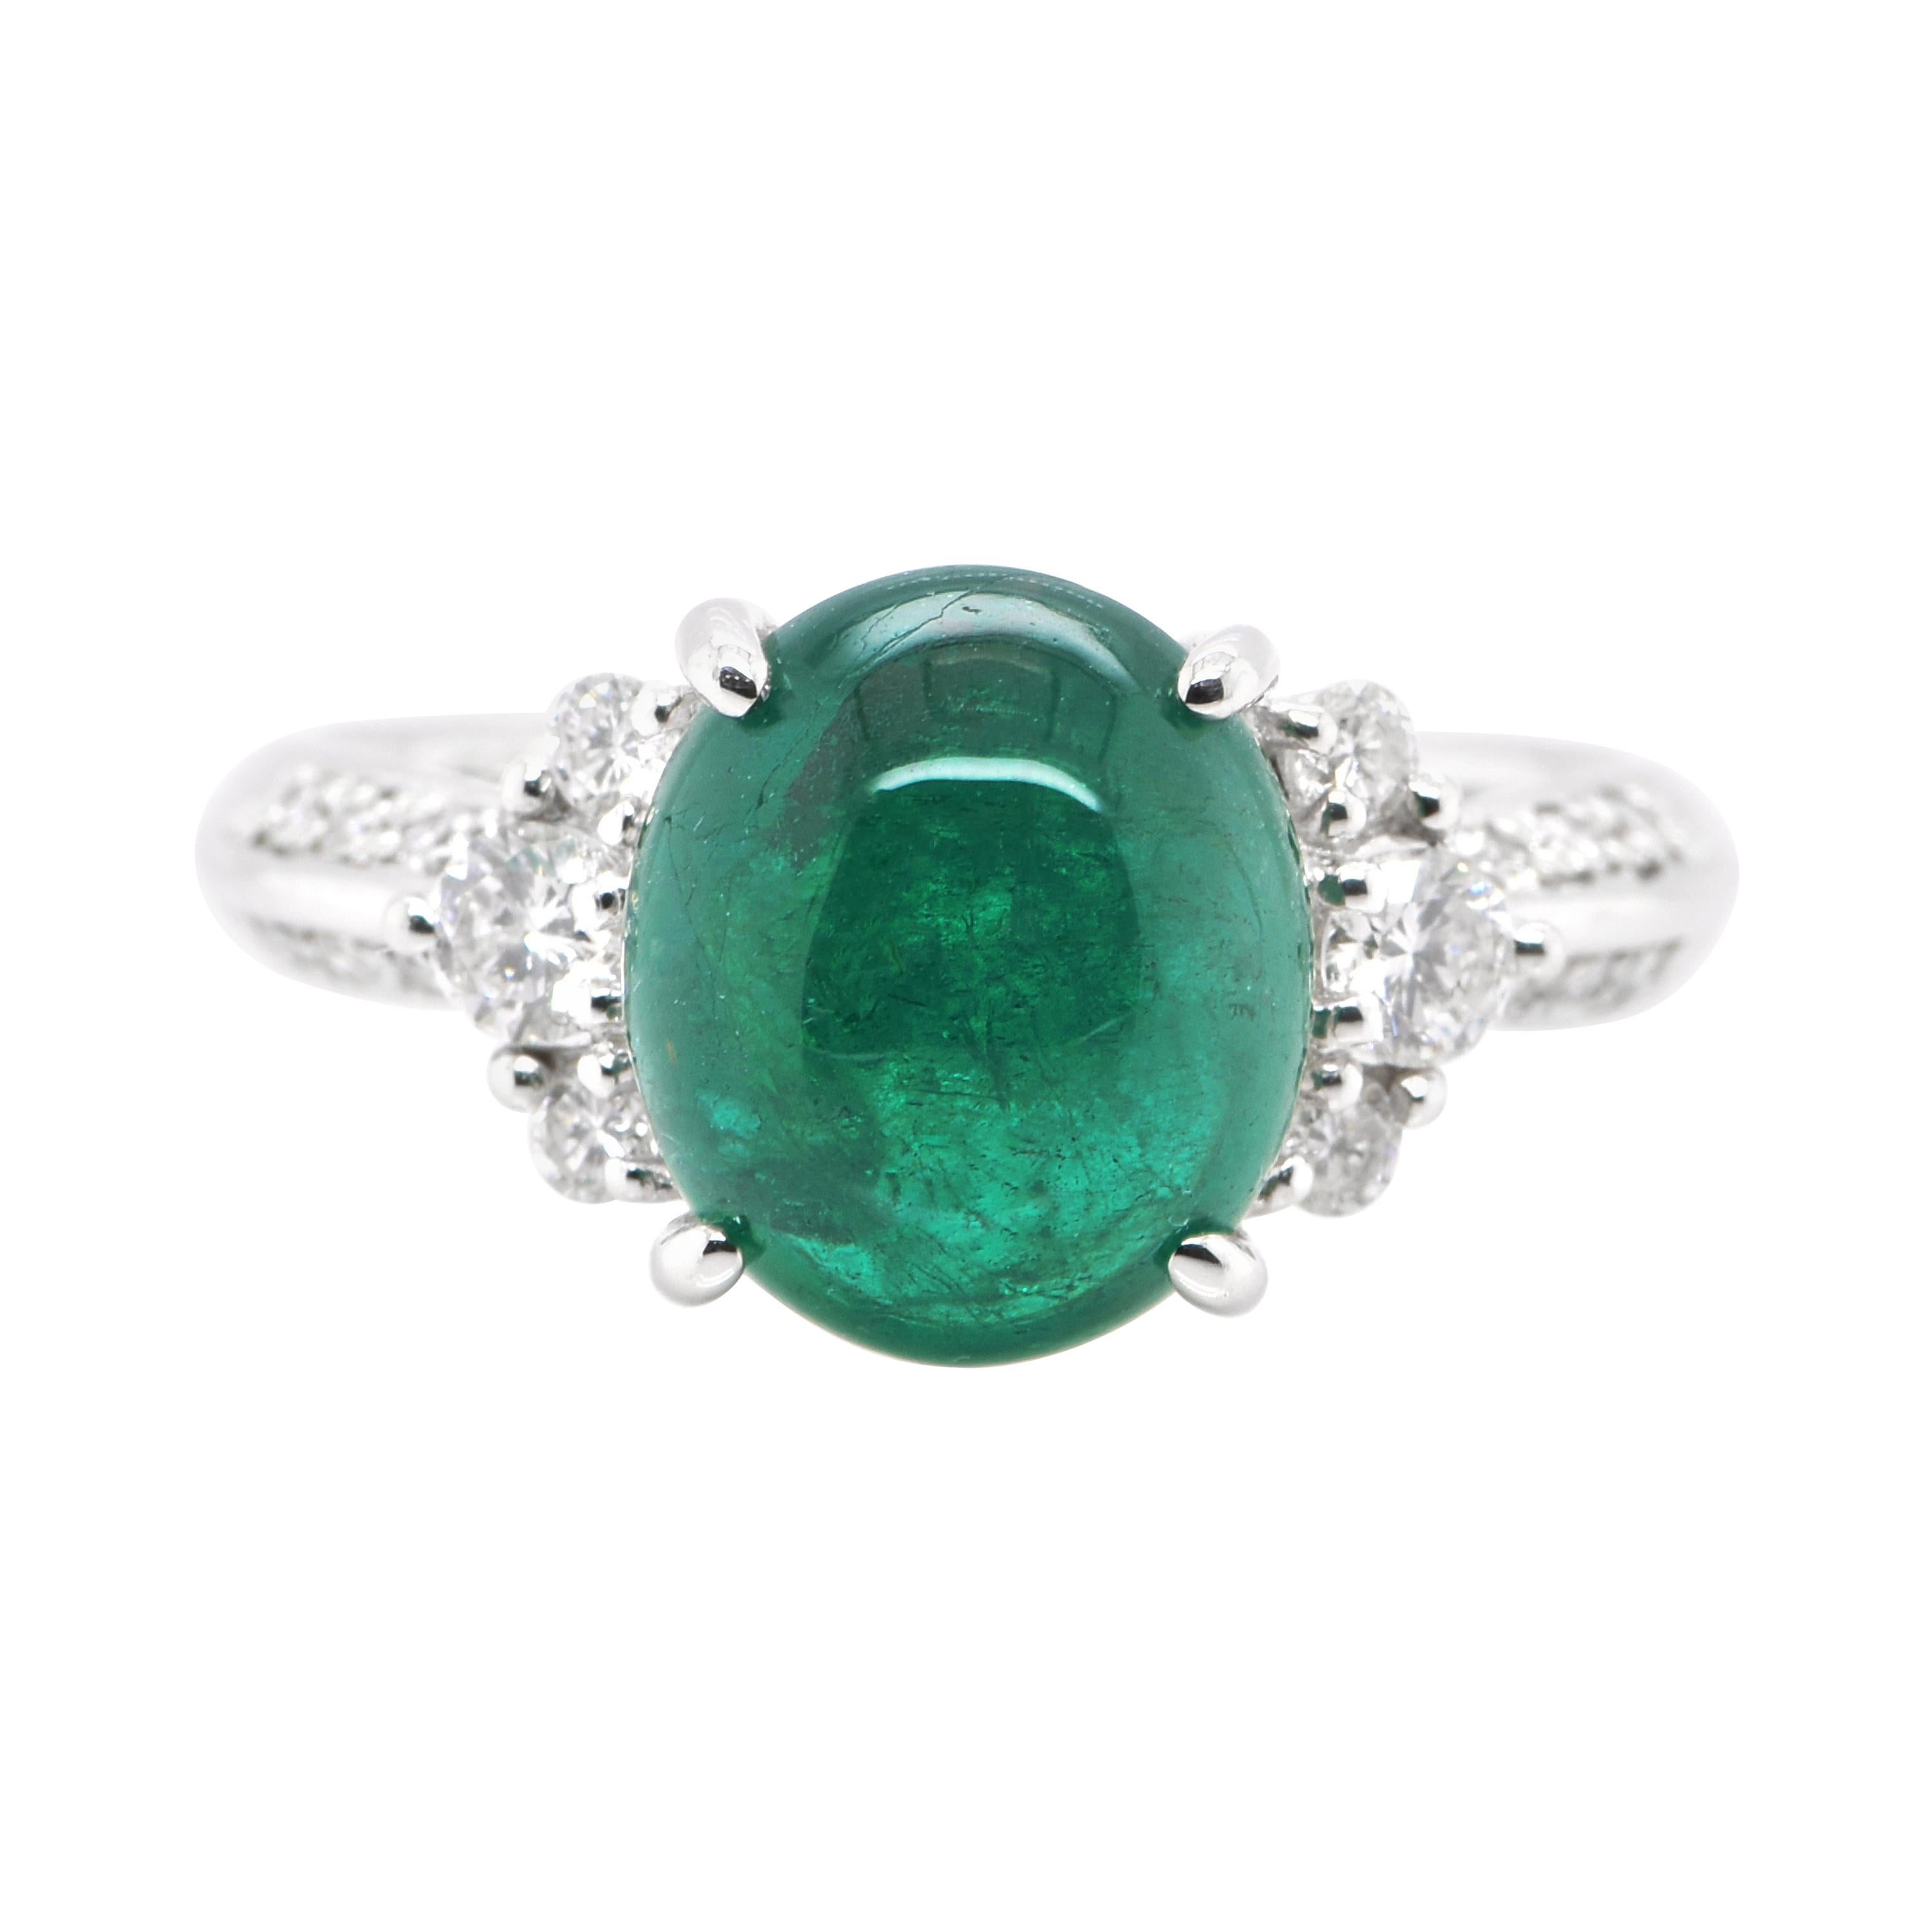 3.97 Carat, Natural, Colombian Emerald Cabochon and Diamond Ring Set in Platinum